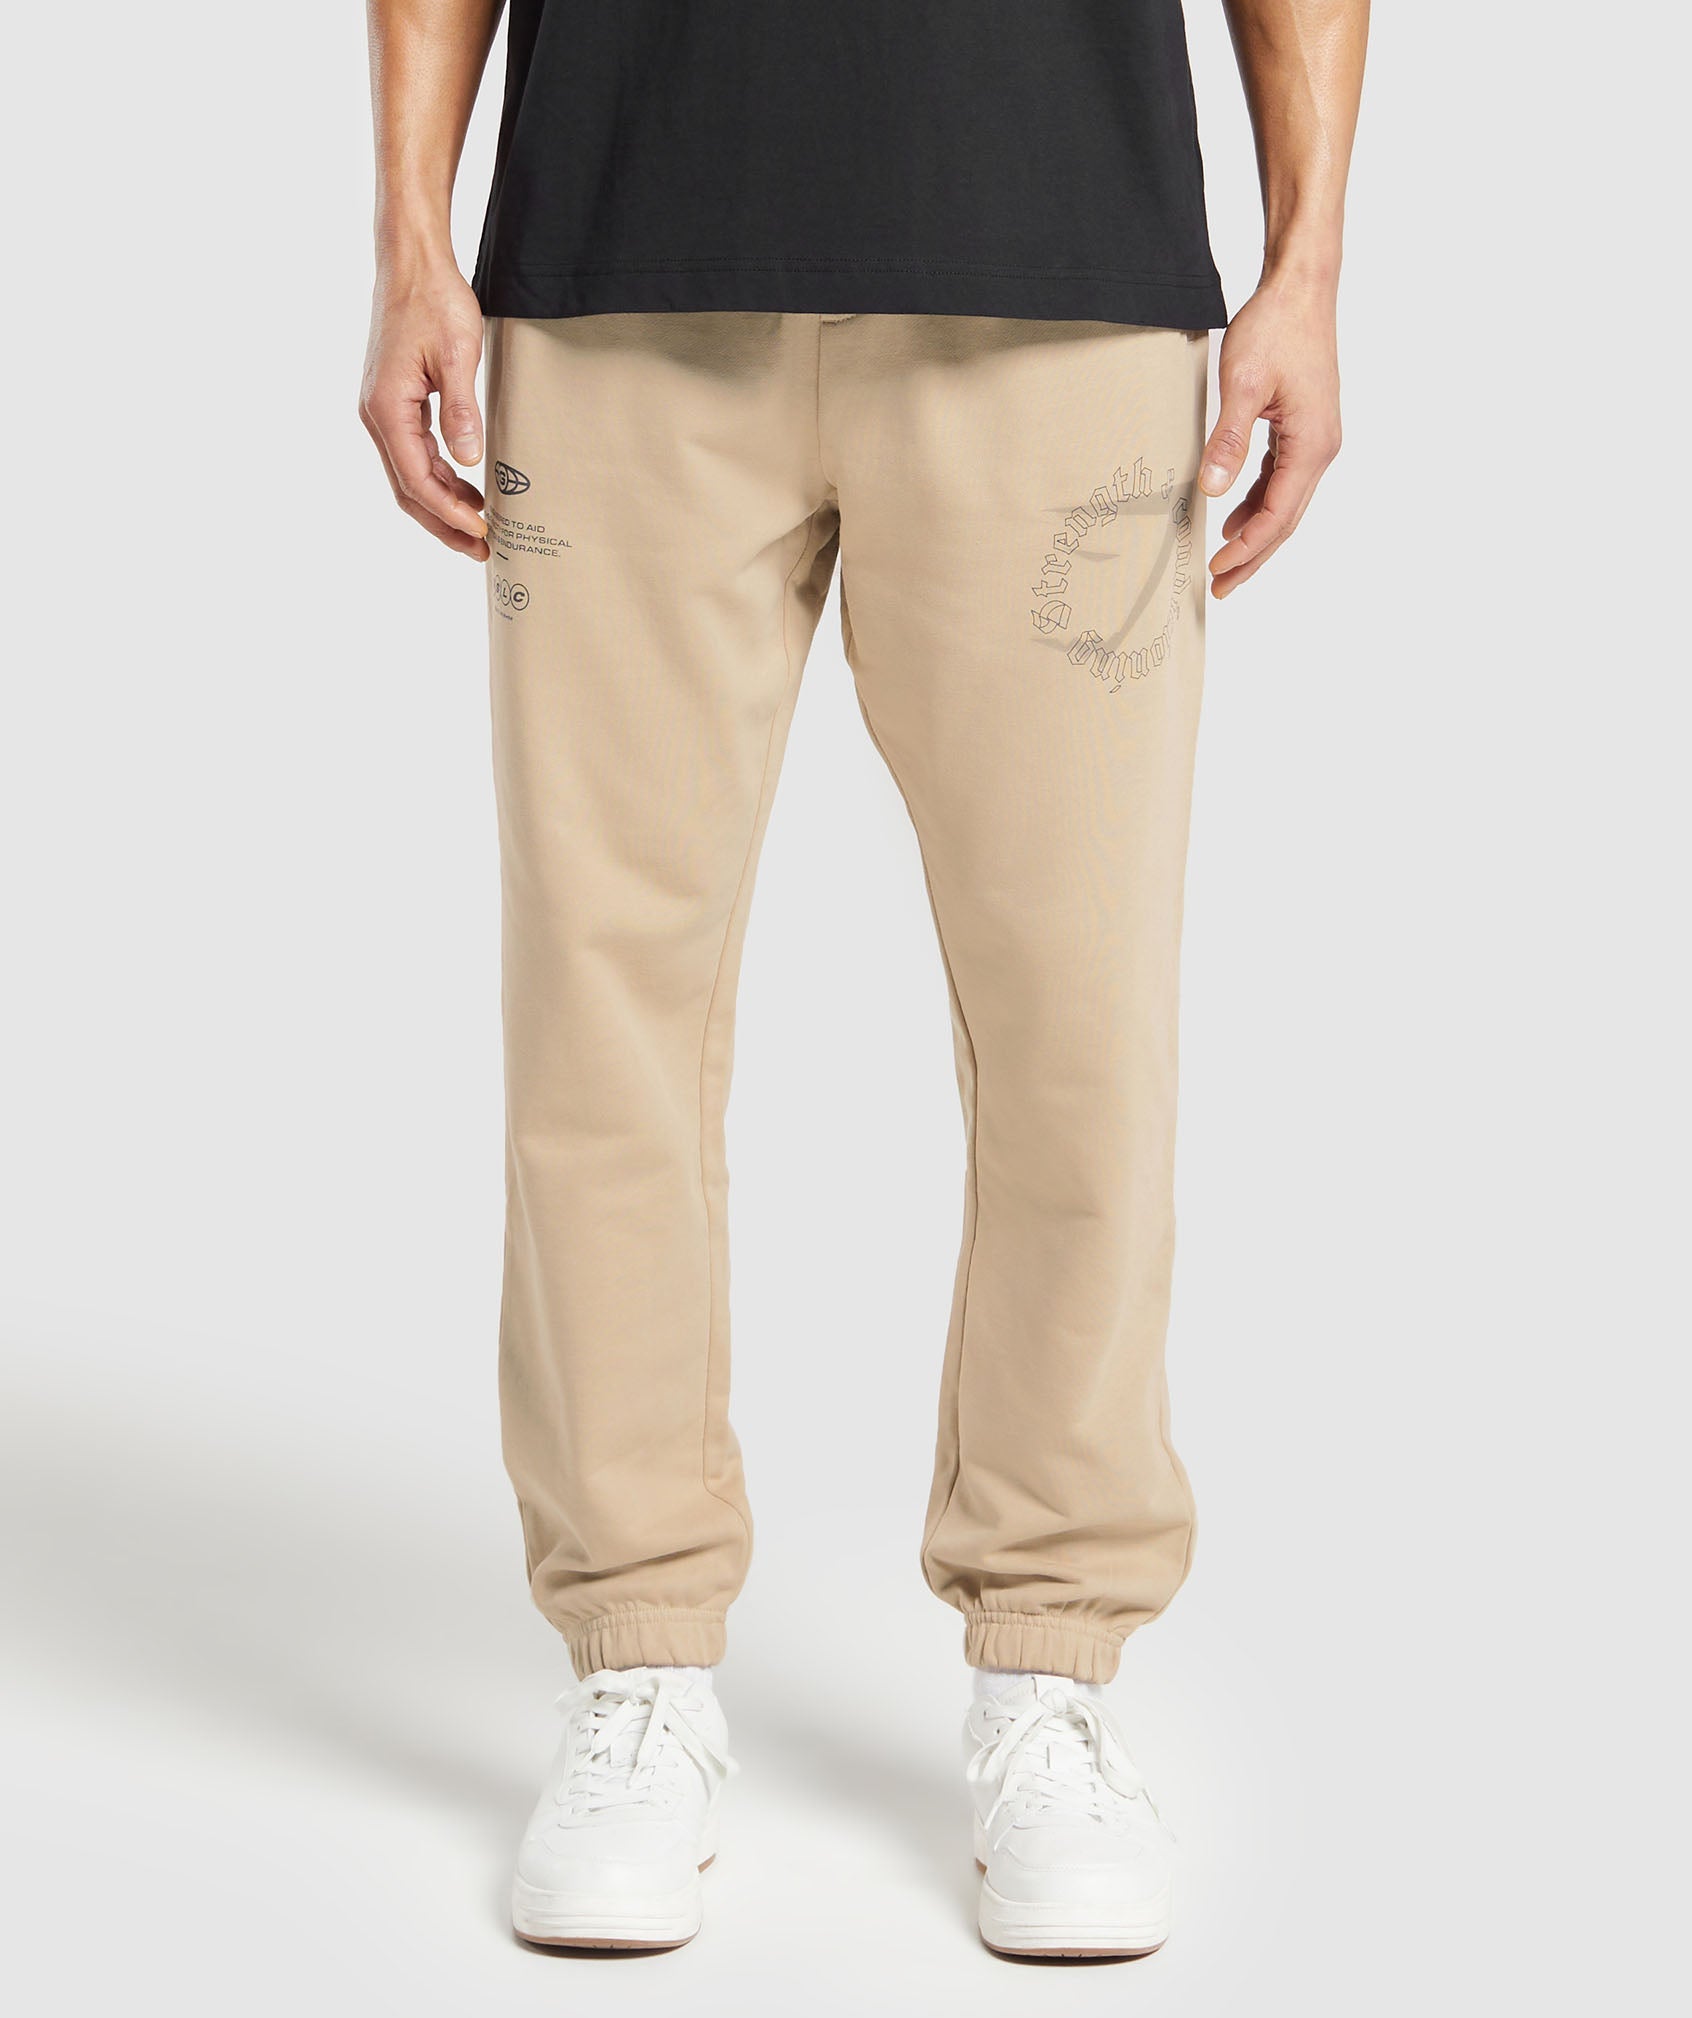 Strength and Conditioning Joggers in Vanilla Beige - view 2